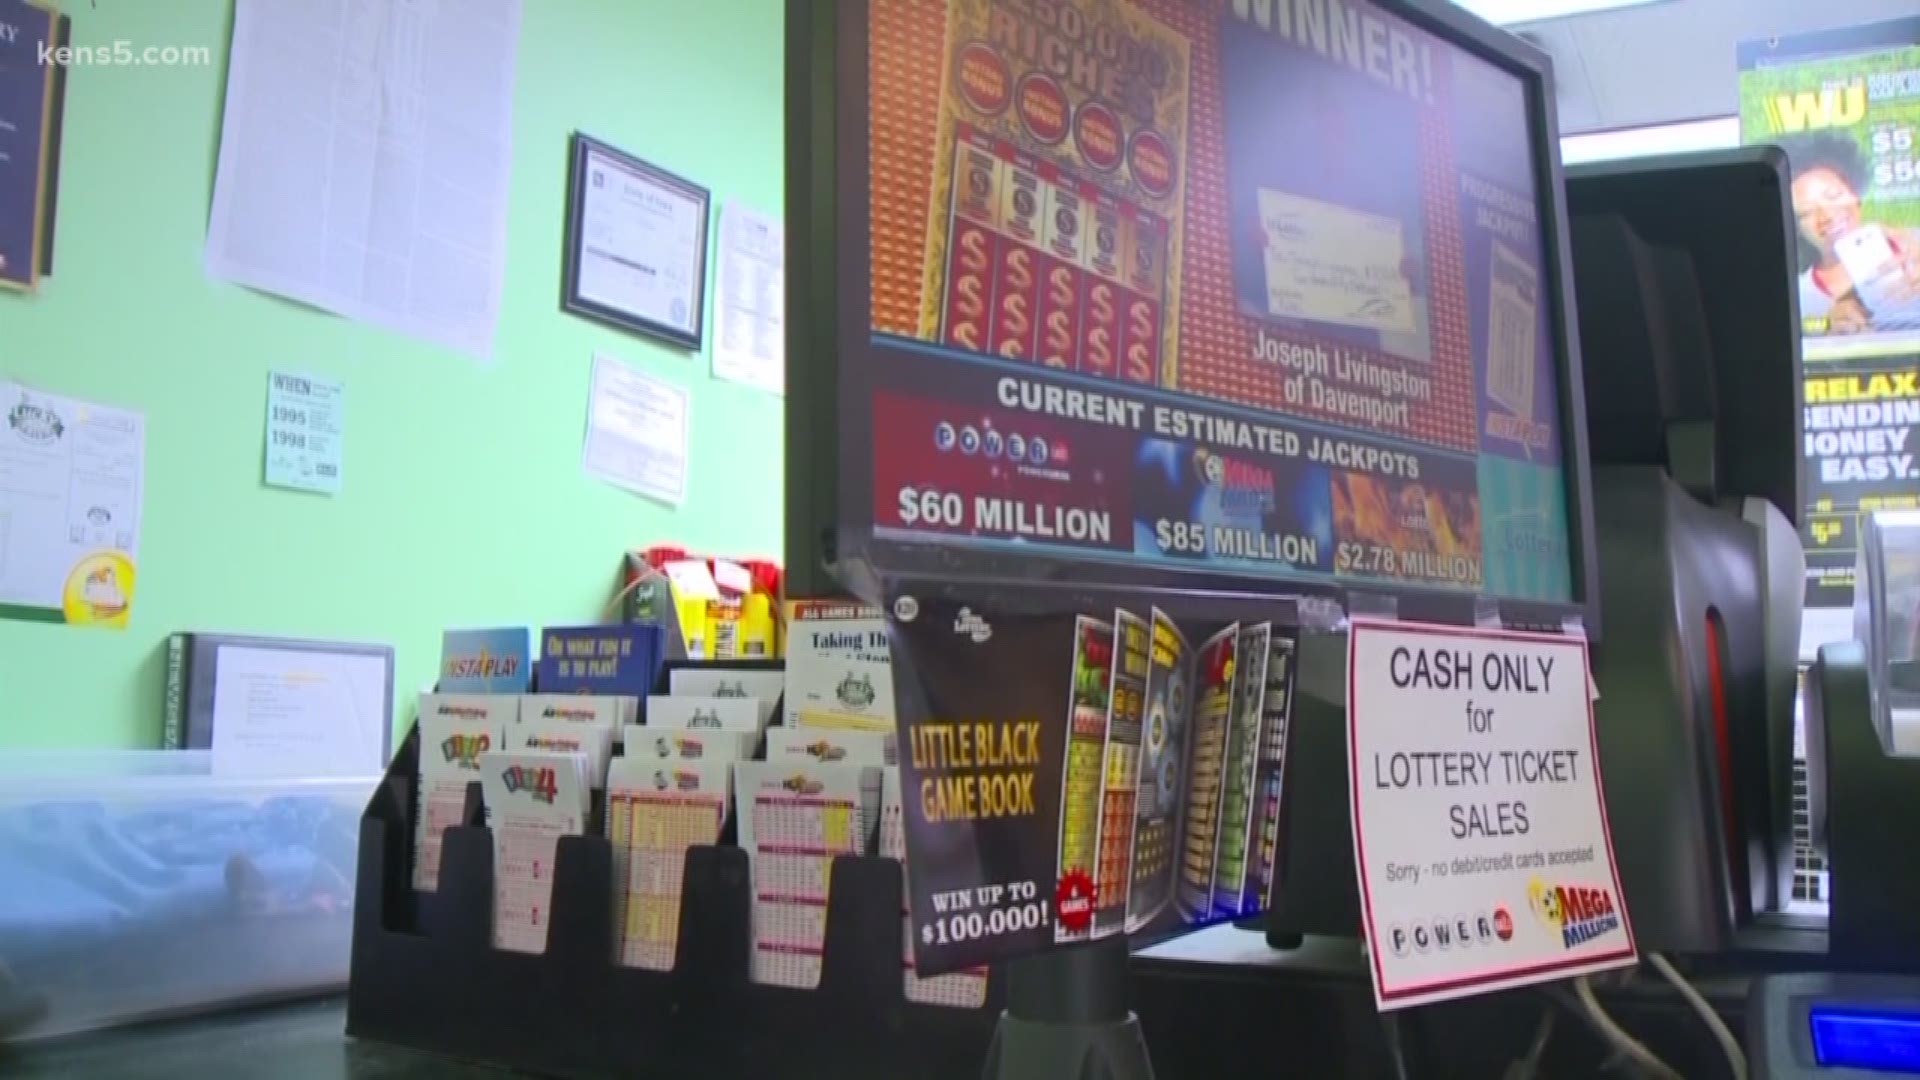 422 million dollars is up for grabs and tonight one lucky person may win it all in the Mega Millions Jackpot. Eyeywitness News reporter Charlie Cooper has more on the odds.